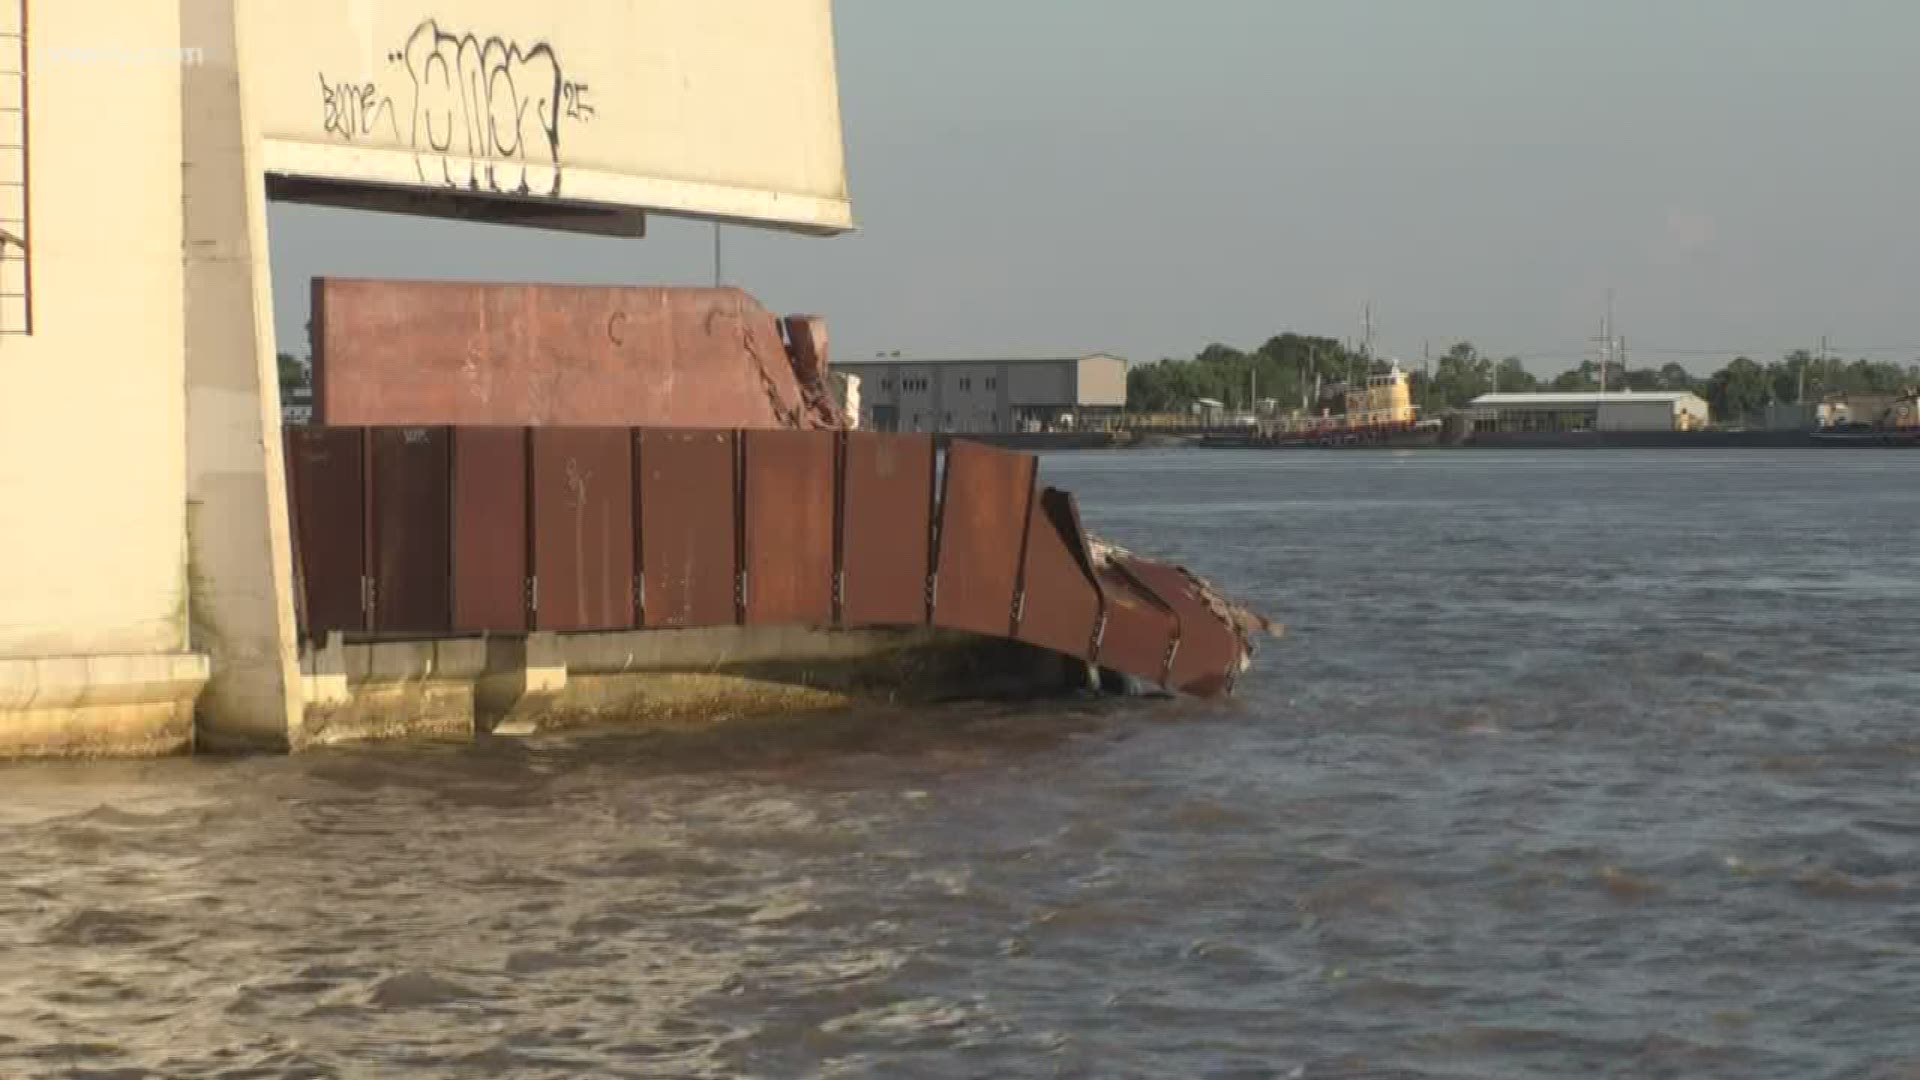 A popular spot along the Mississippi River, the Piety Wharf, was closed Monday night after a barge collision.